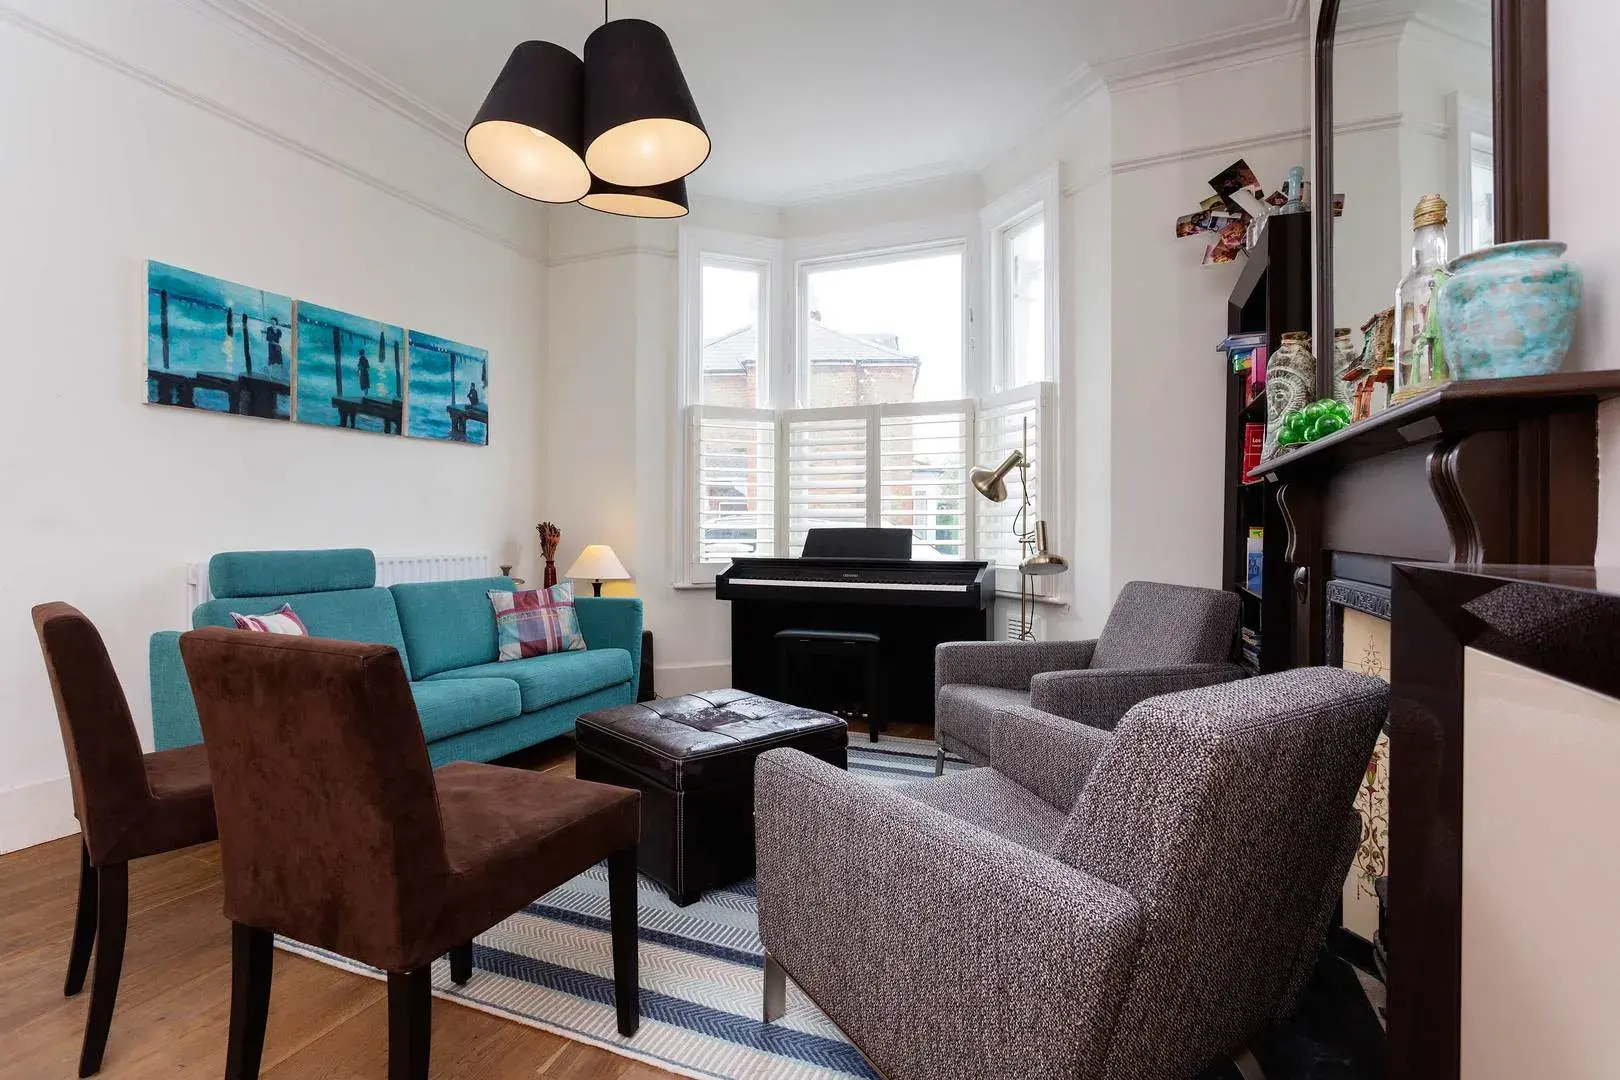 Leathwaite Road, holiday home in Clapham, London